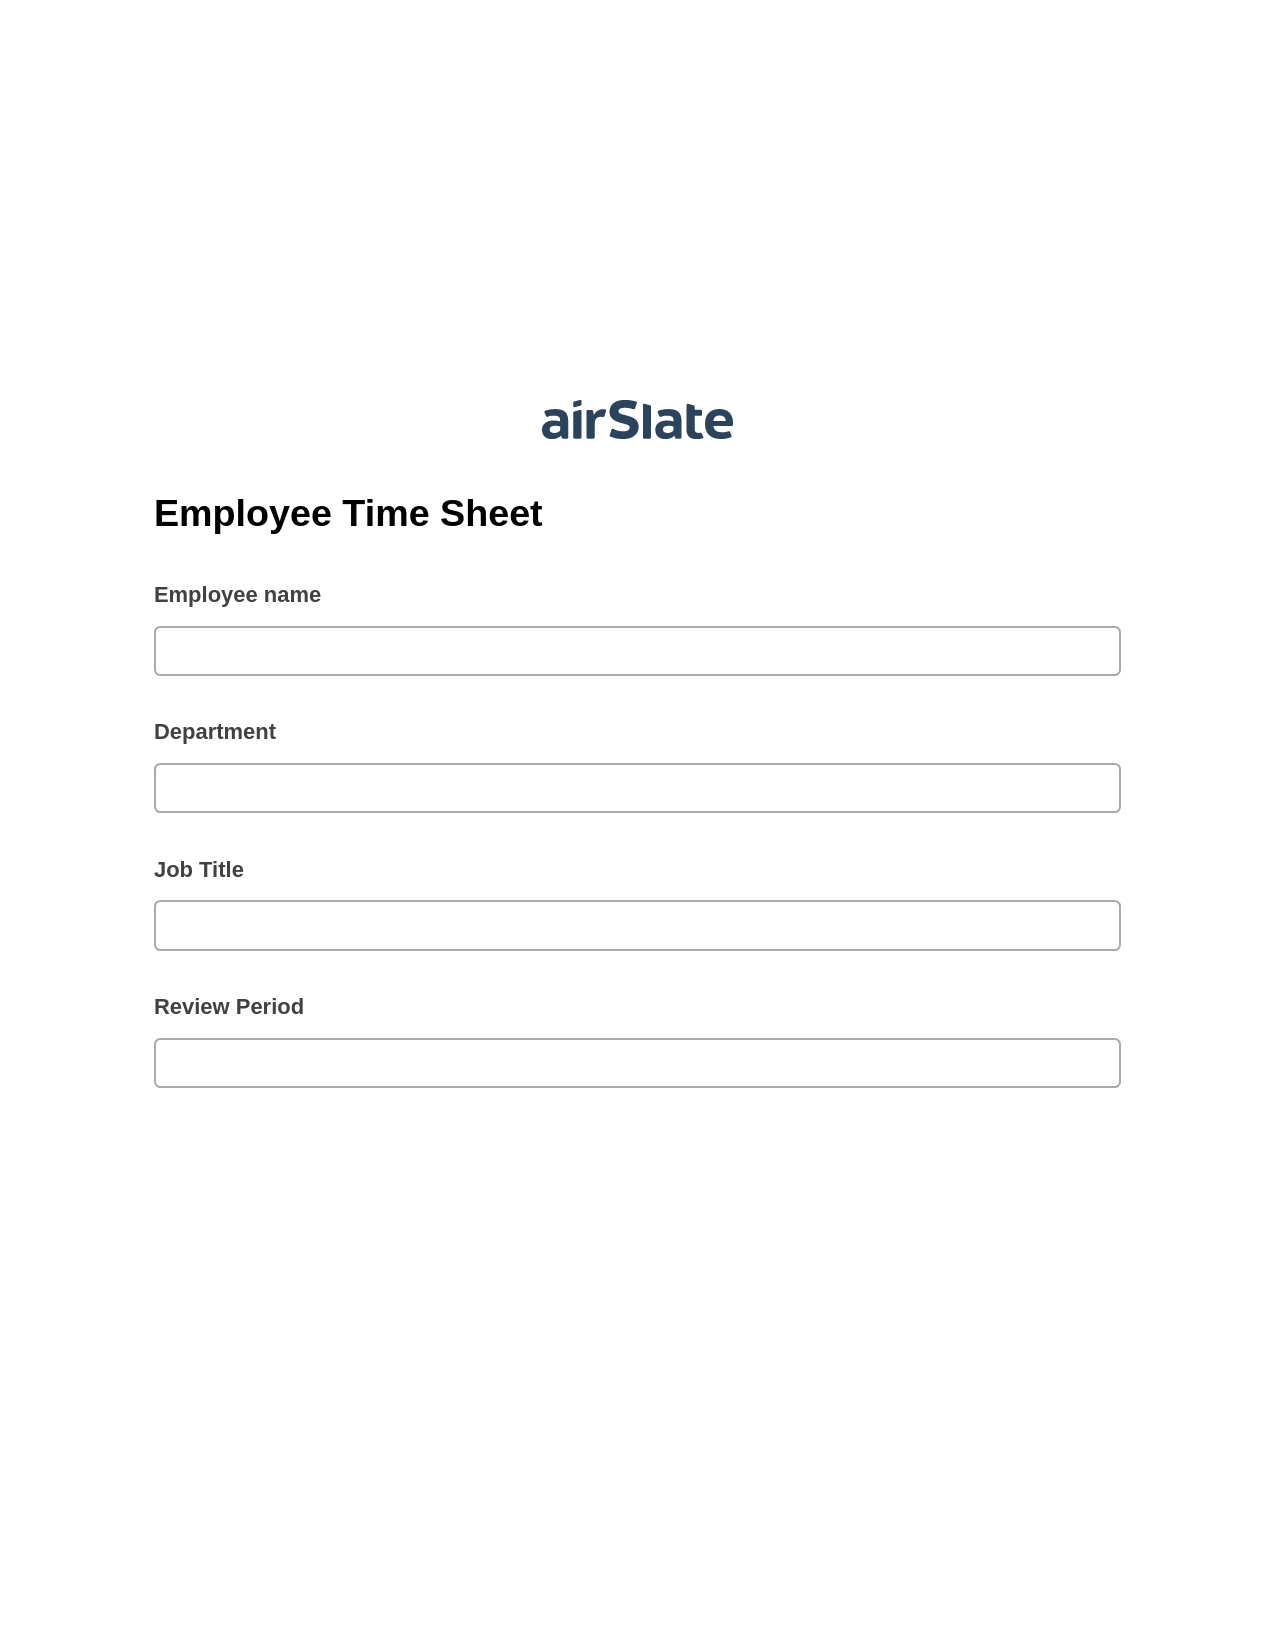 Multirole Employee Time Sheet Pre-fill Document Bot, Assign Roles to Recipients Bot, Archive to Dropbox Bot